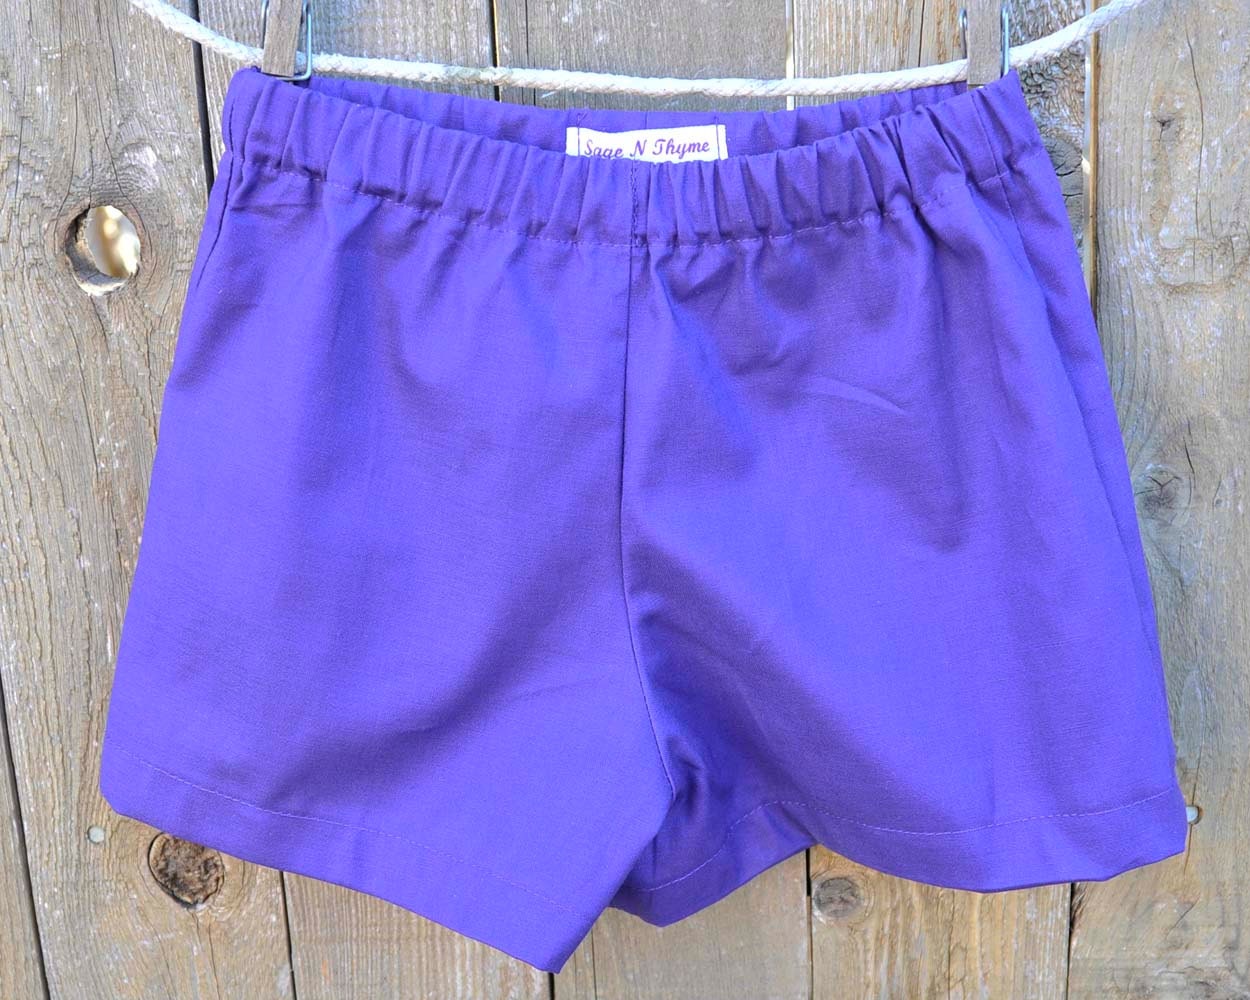 Child cotton shorts or pants shorts for boys and girls | Etsy